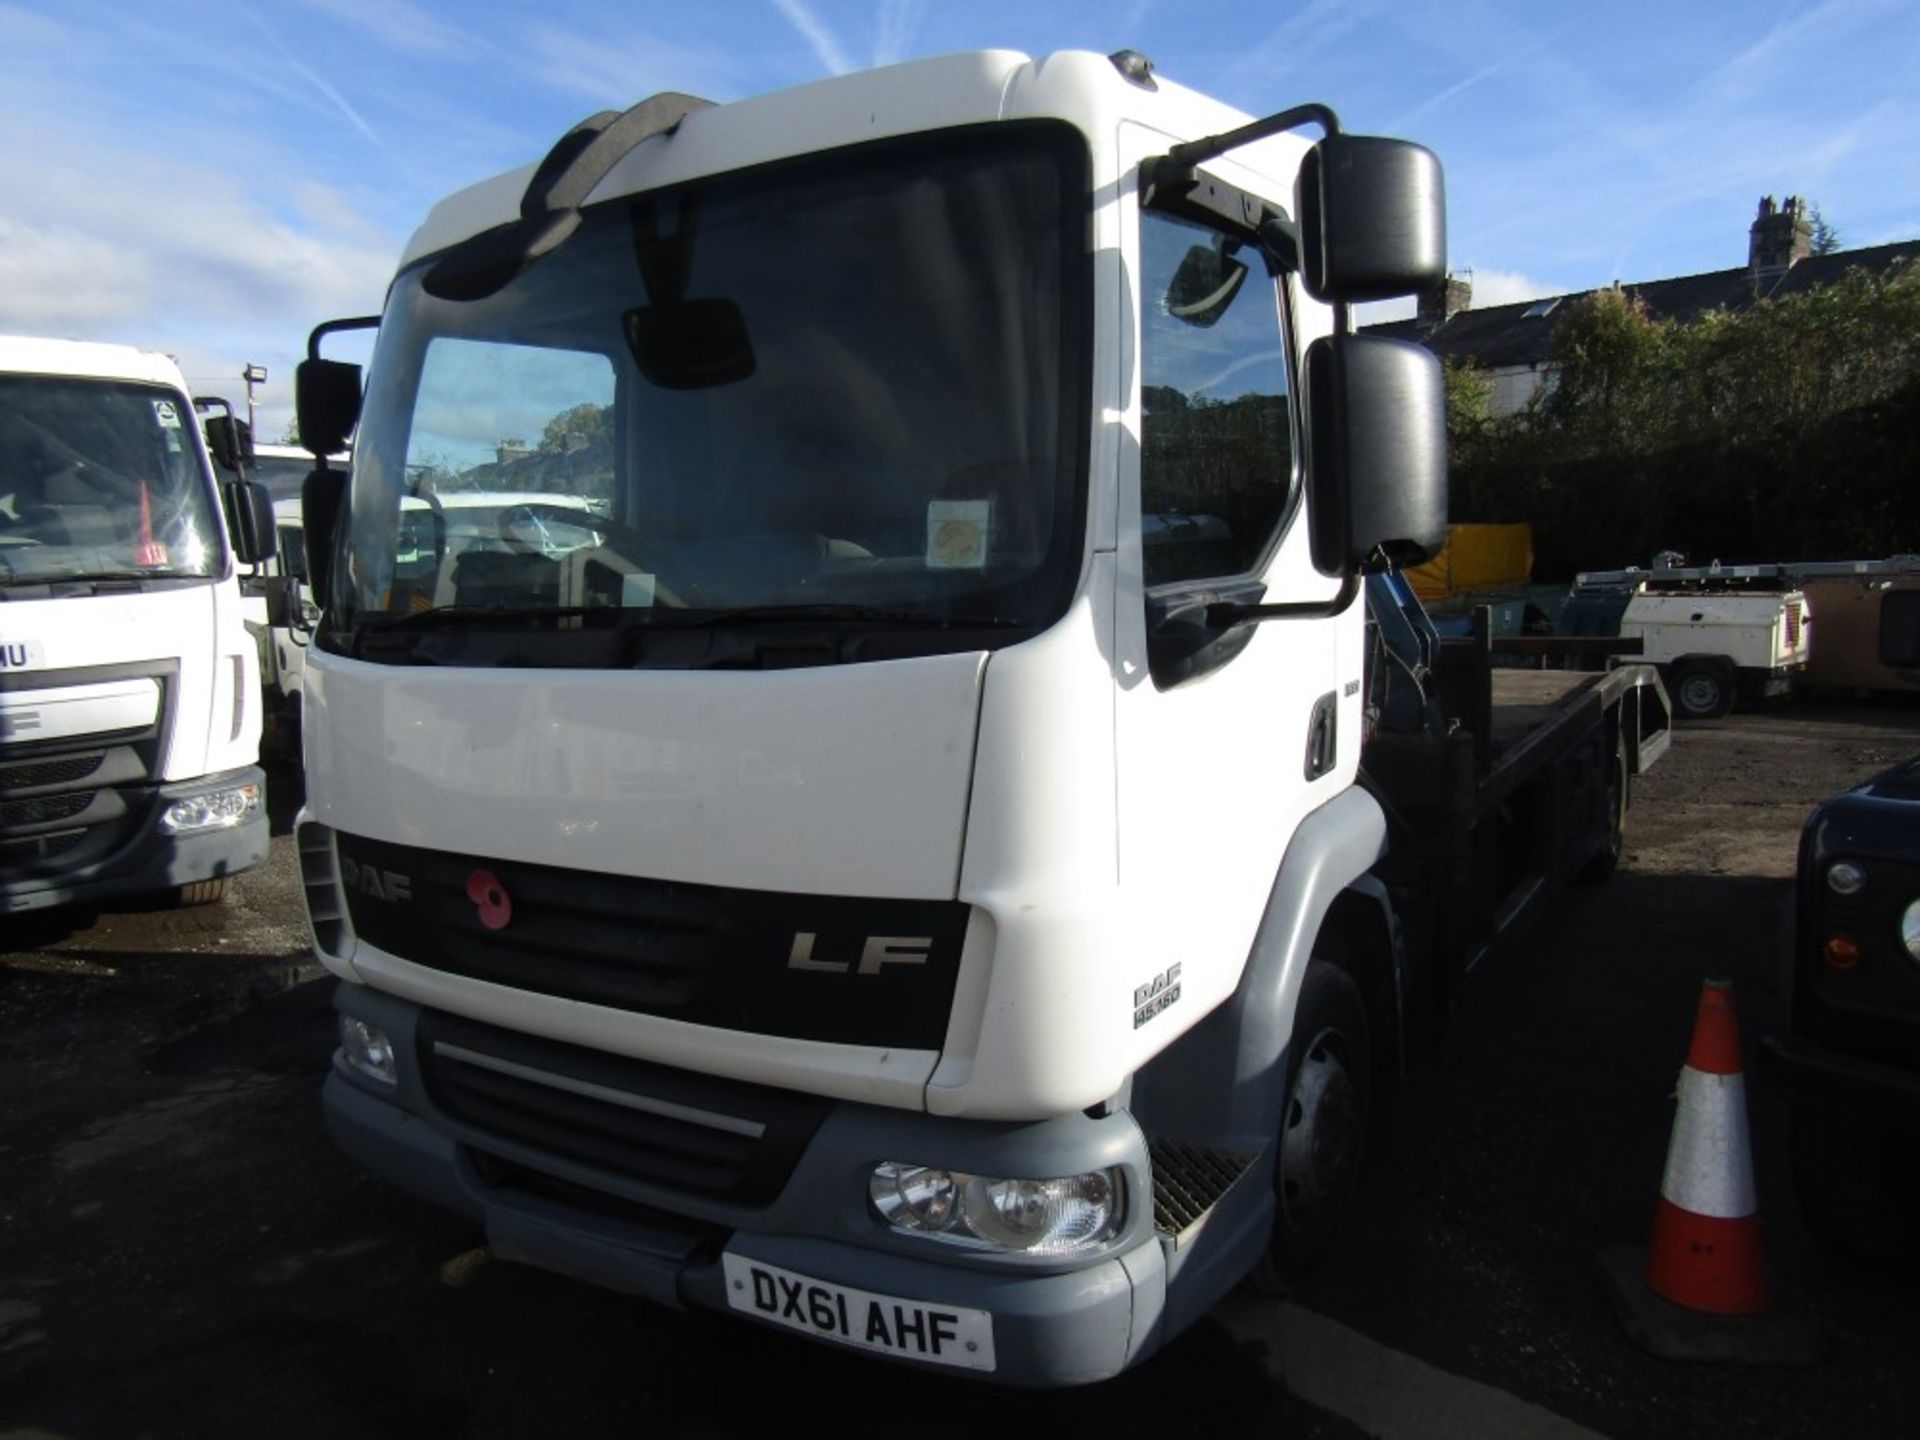 61 reg DAF FA LF45 RECOVERY C/W HIAB, 1ST REG 10/11, V5 HERE, 3 FORMER KEEPERS ]NO VAT] - Image 2 of 7